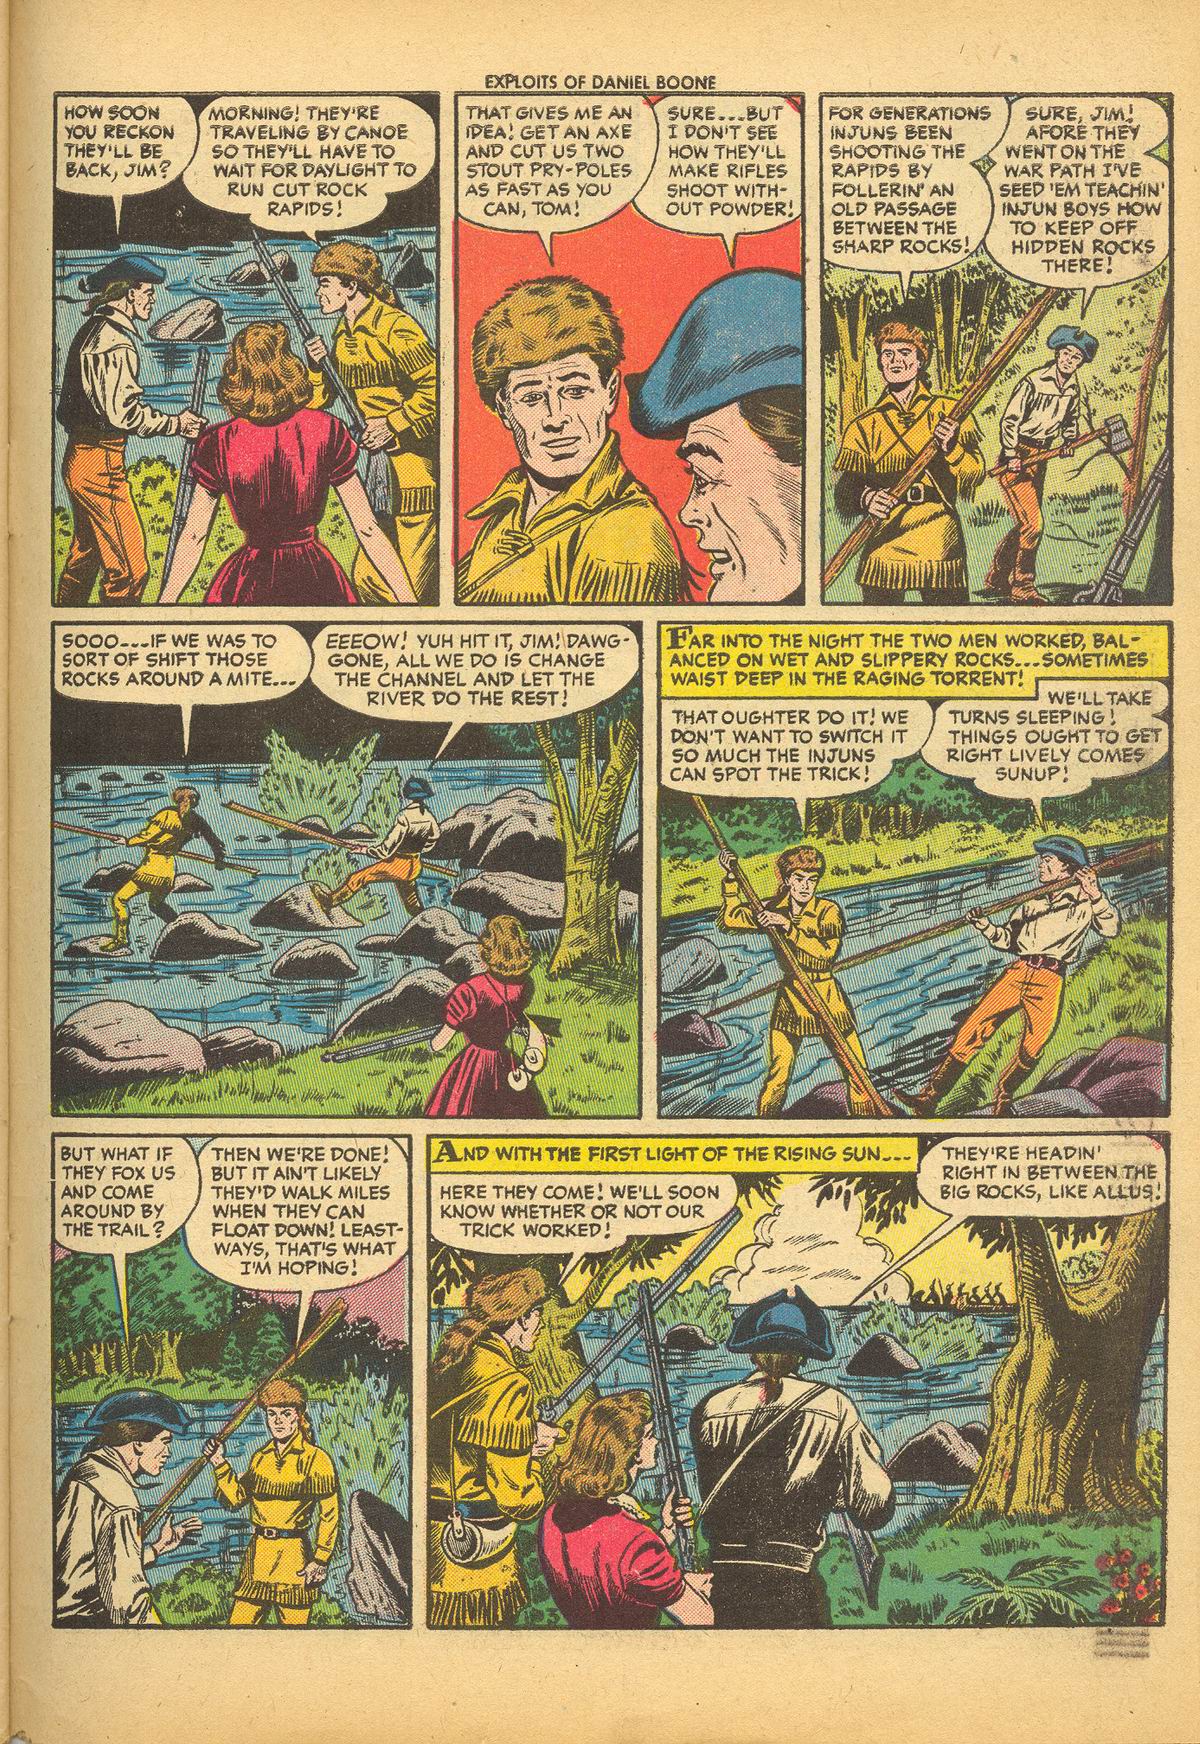 Read online Exploits of Daniel Boone comic -  Issue #3 - 31